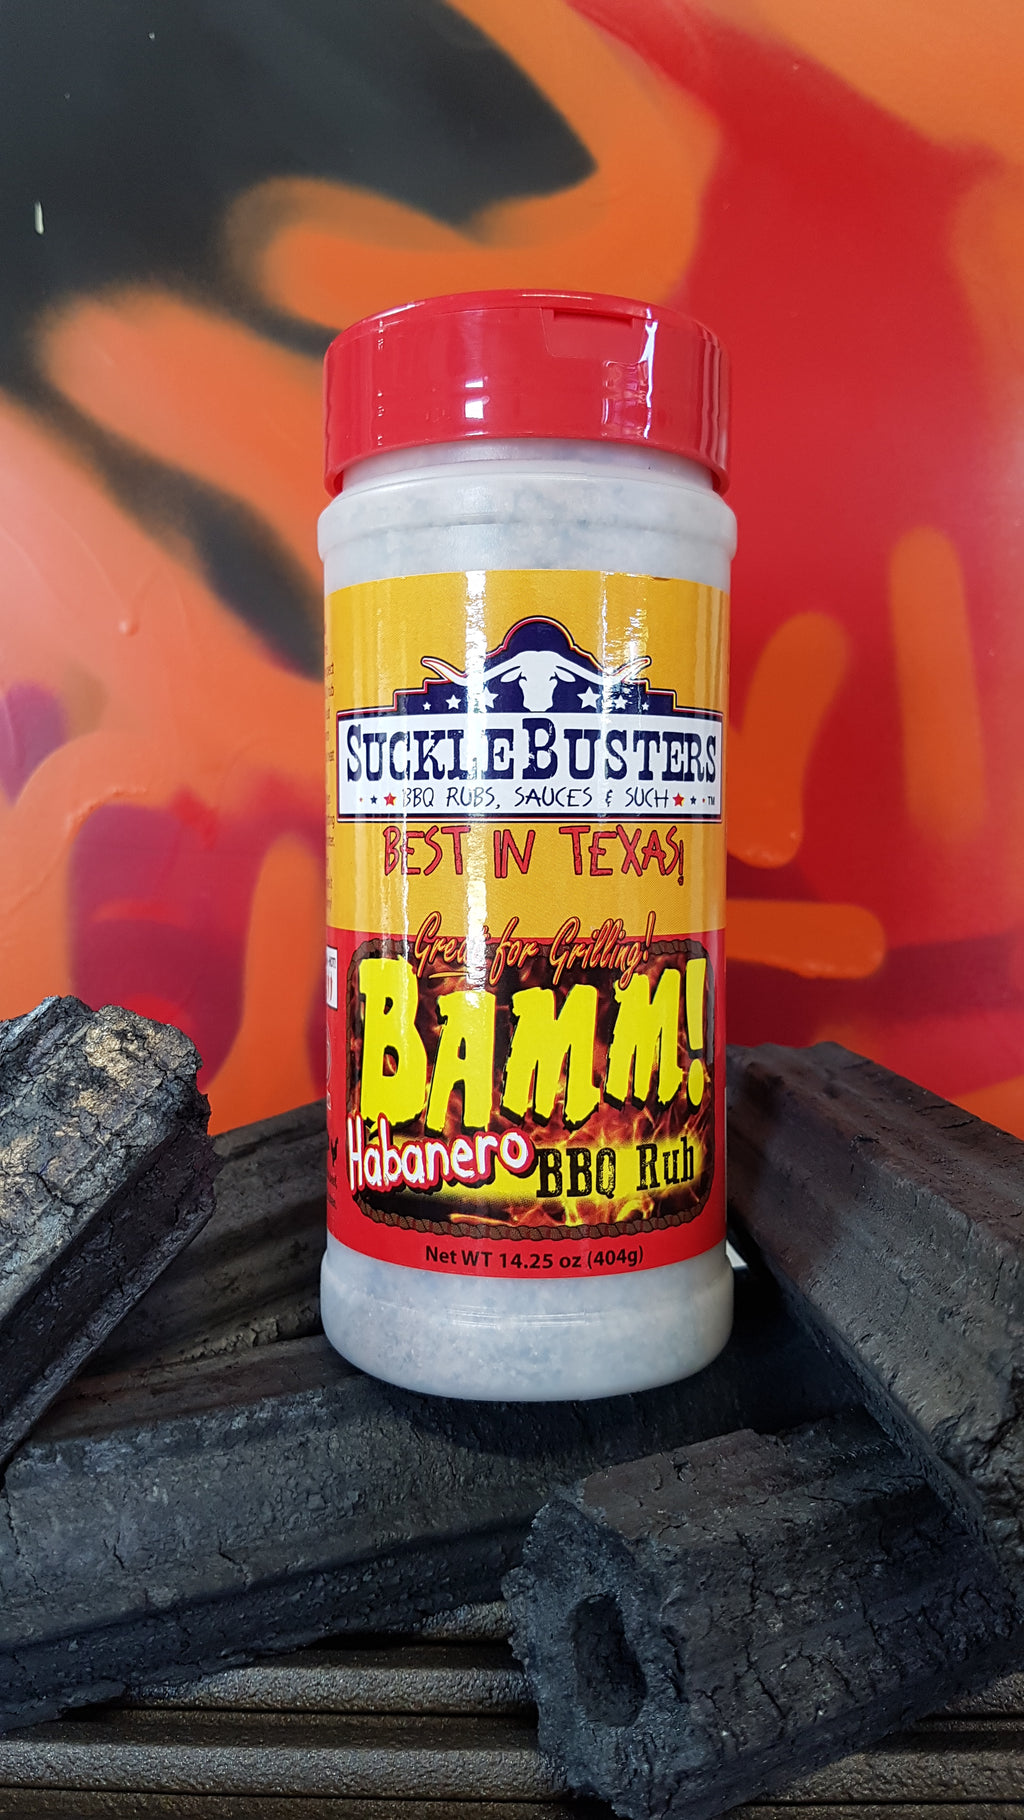 BAMM! Habanero BBQ Rub 404g by Sucklebusters